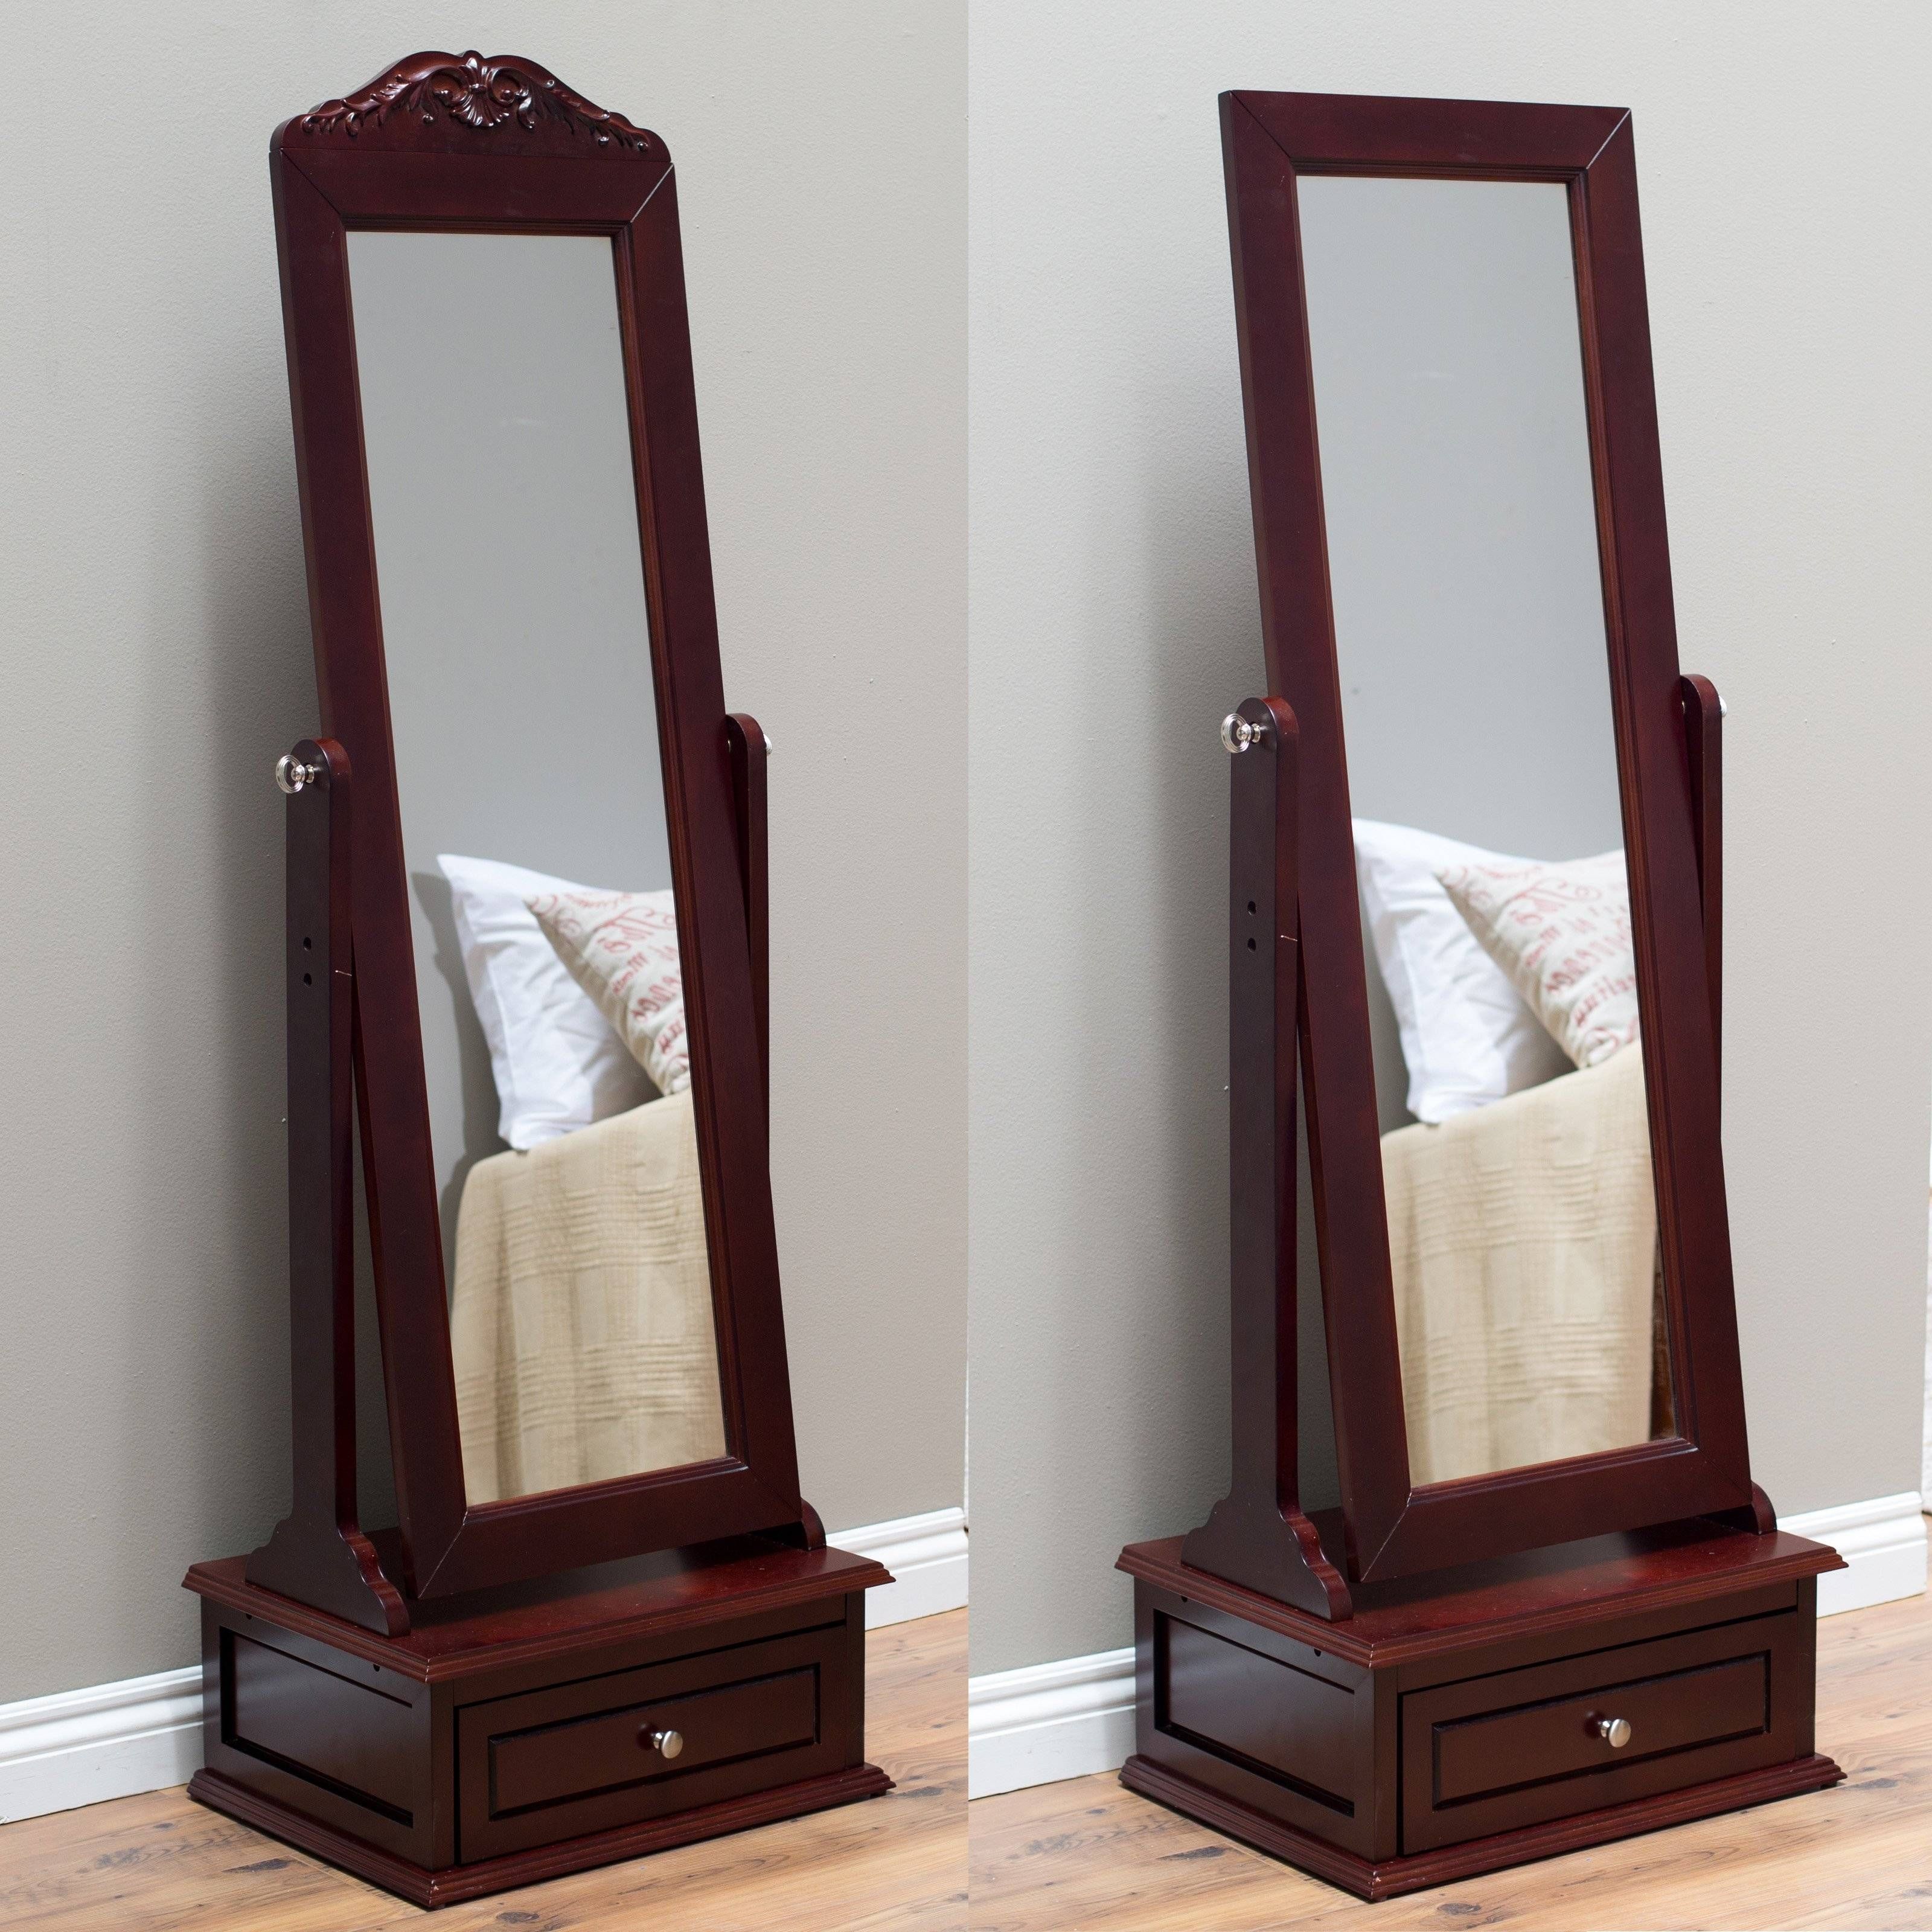 Furniture: Charming Cheval Mirror Jewelry Armoire Ideas Intended For Long Dressing Mirrors (View 3 of 15)